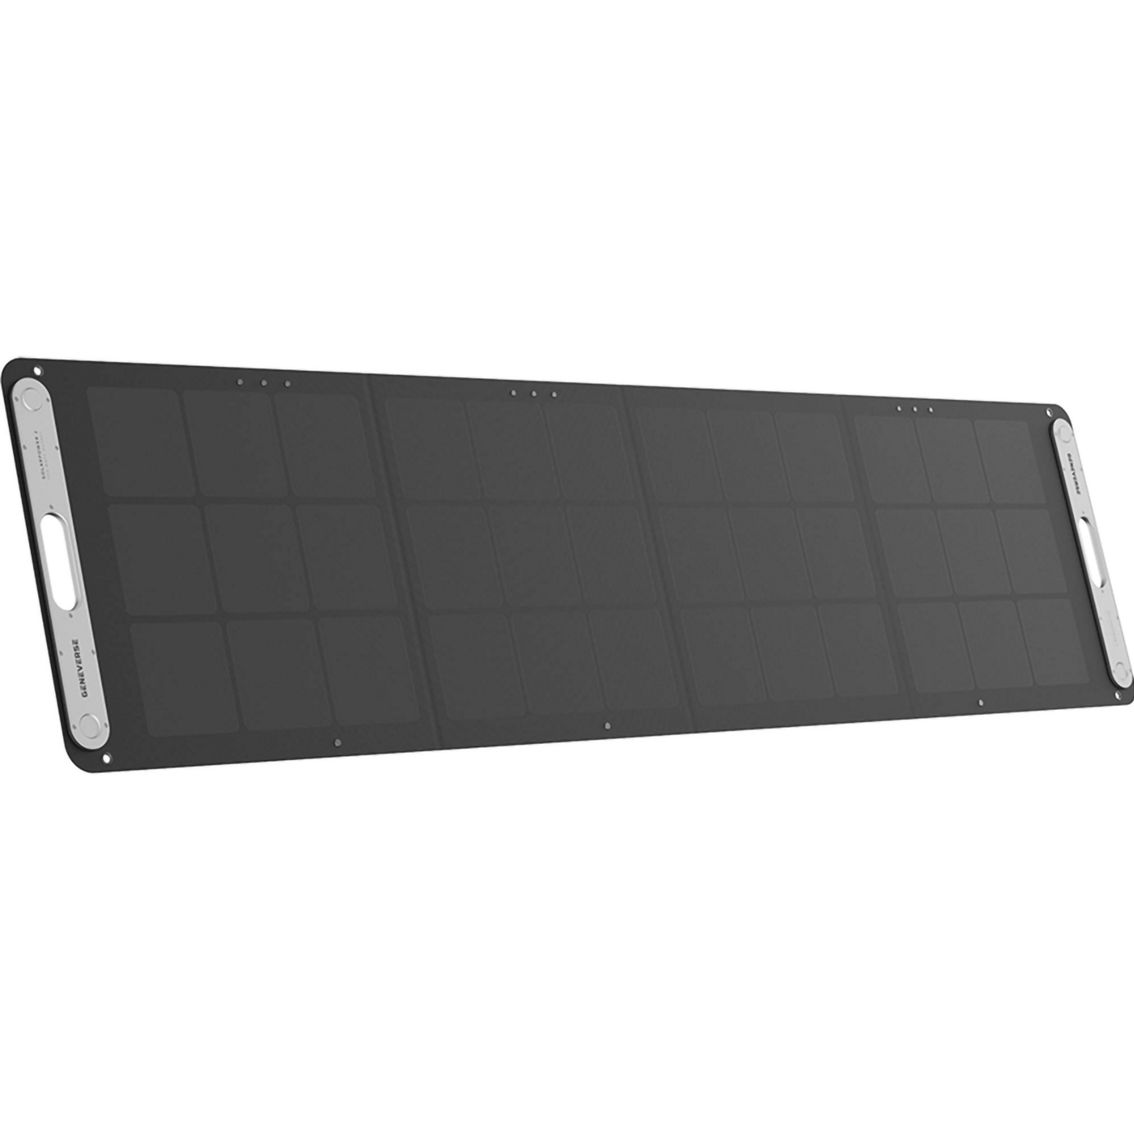 Geneverse SolarPower 2: All-Weather Portable Solar Panels - Image 4 of 5